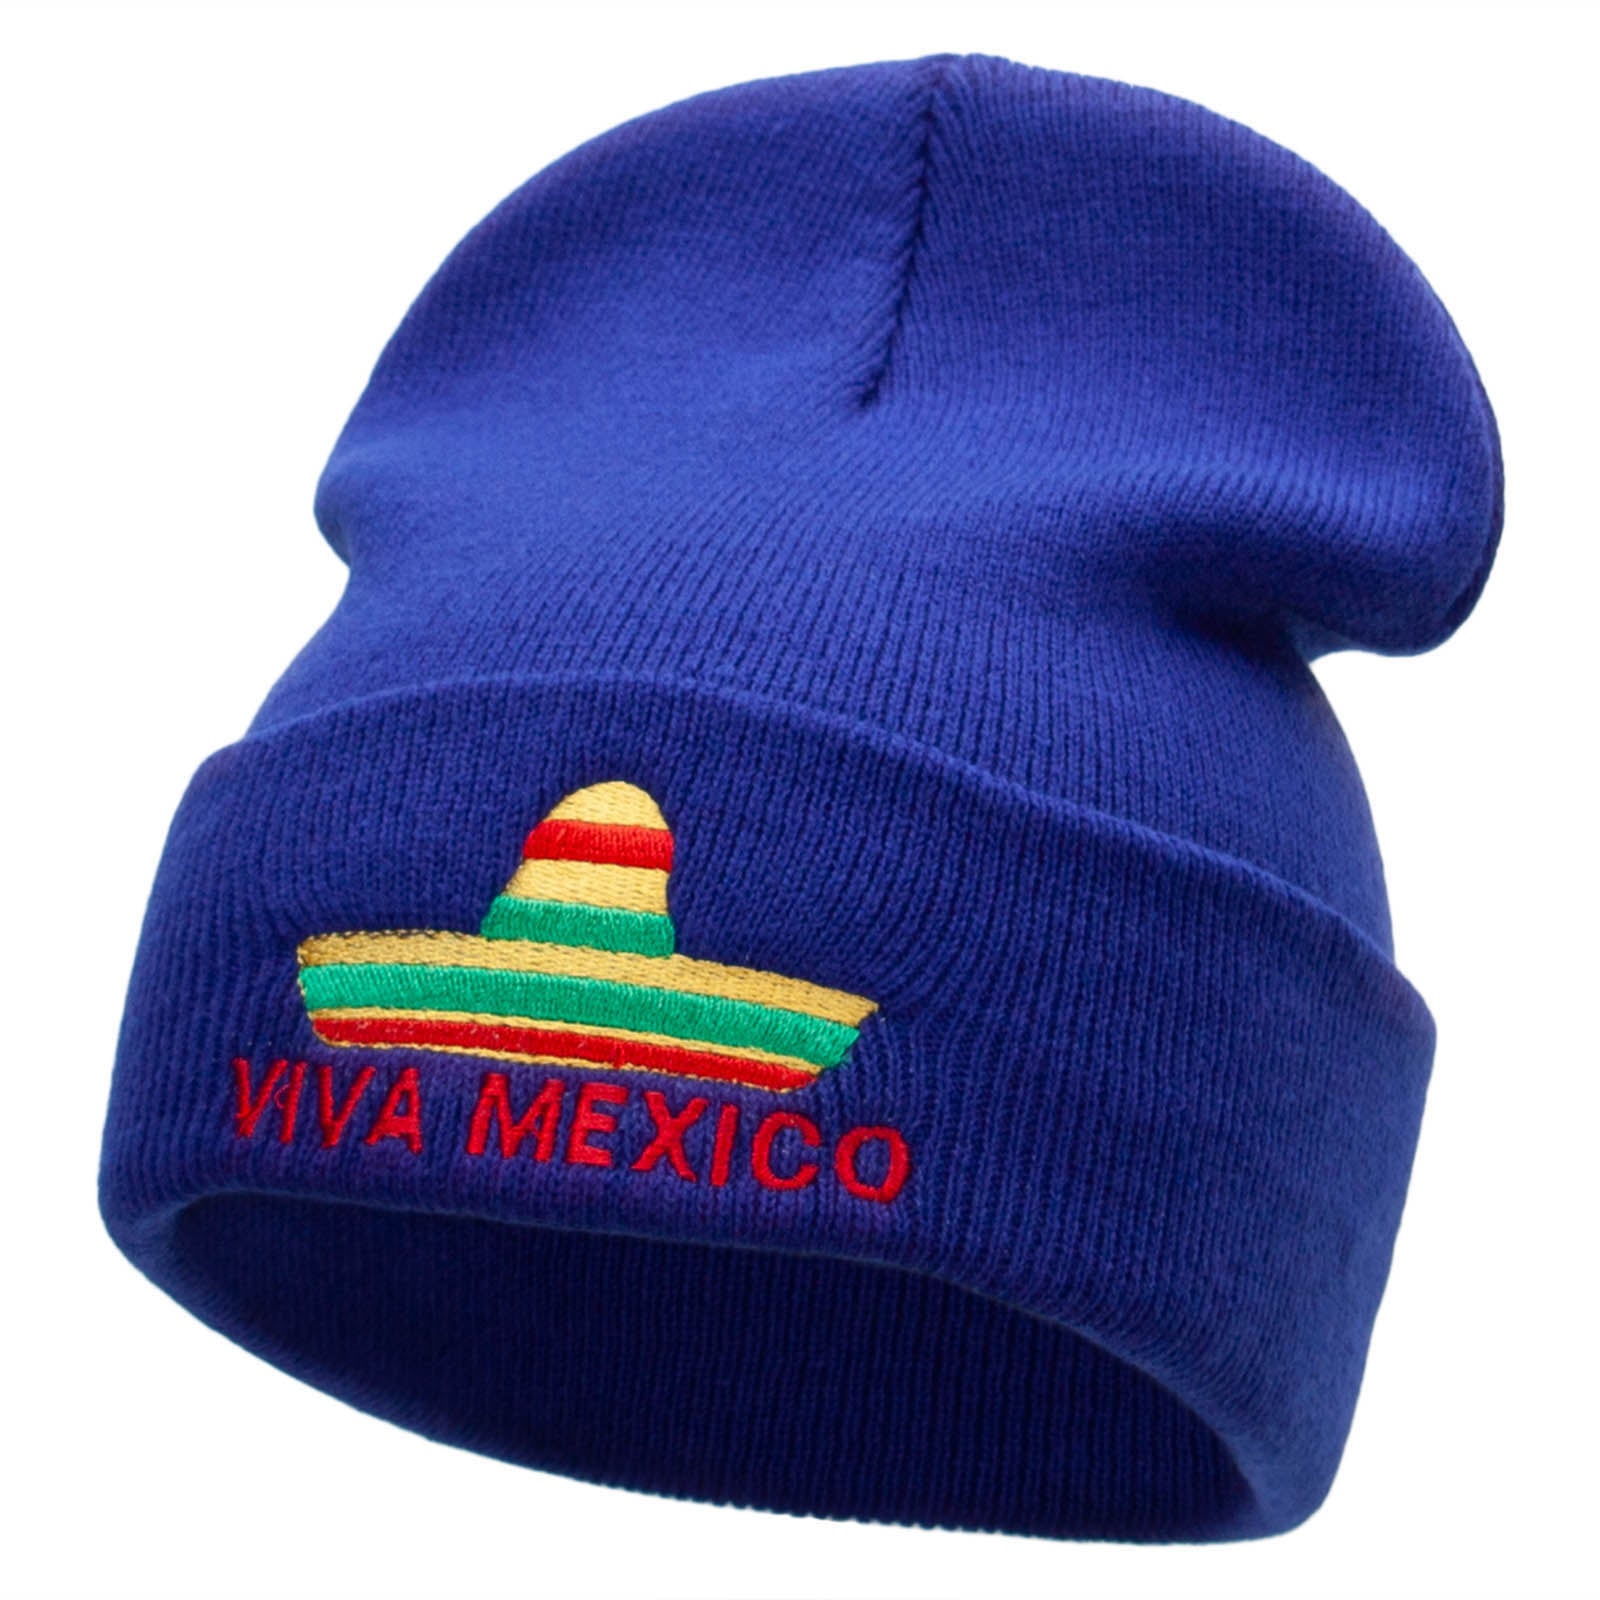 Viva Mexico Independence Embroidered 12 Inch Long Knitted Beanie - Royal OSFM